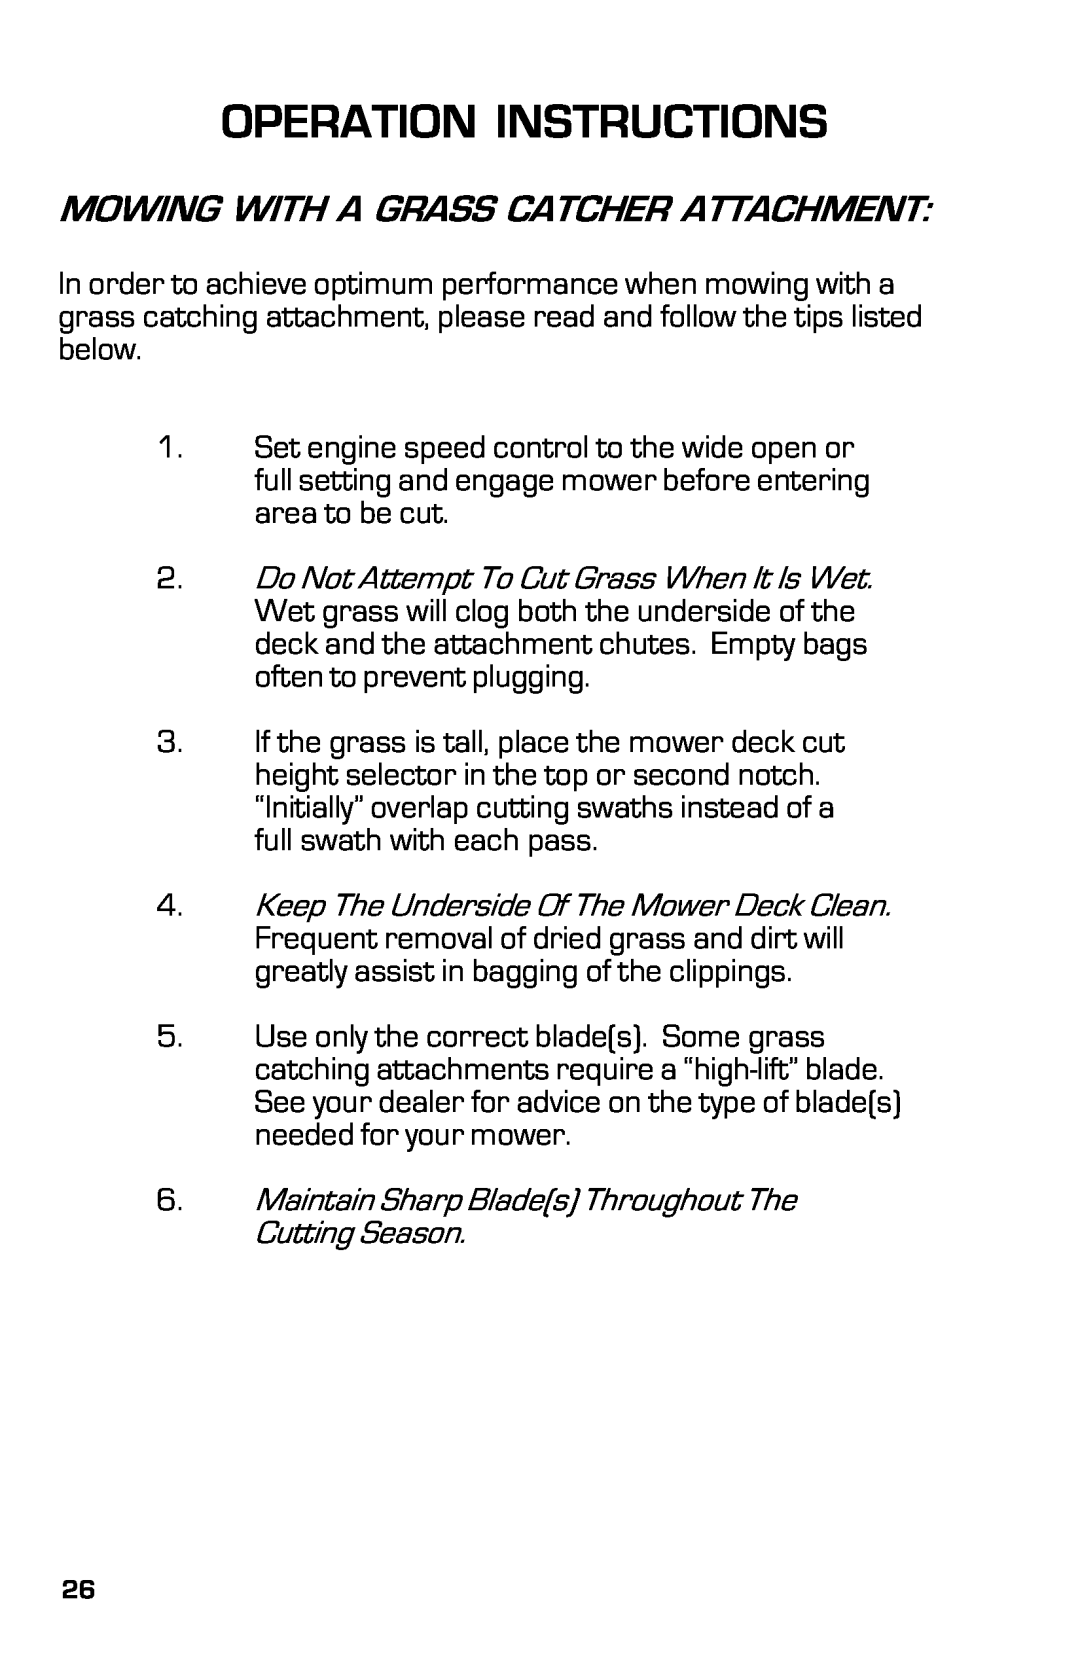 Dixon 2003, 13639-0702 manual Operation Instructions, Mowing With A Grass Catcher Attachment 